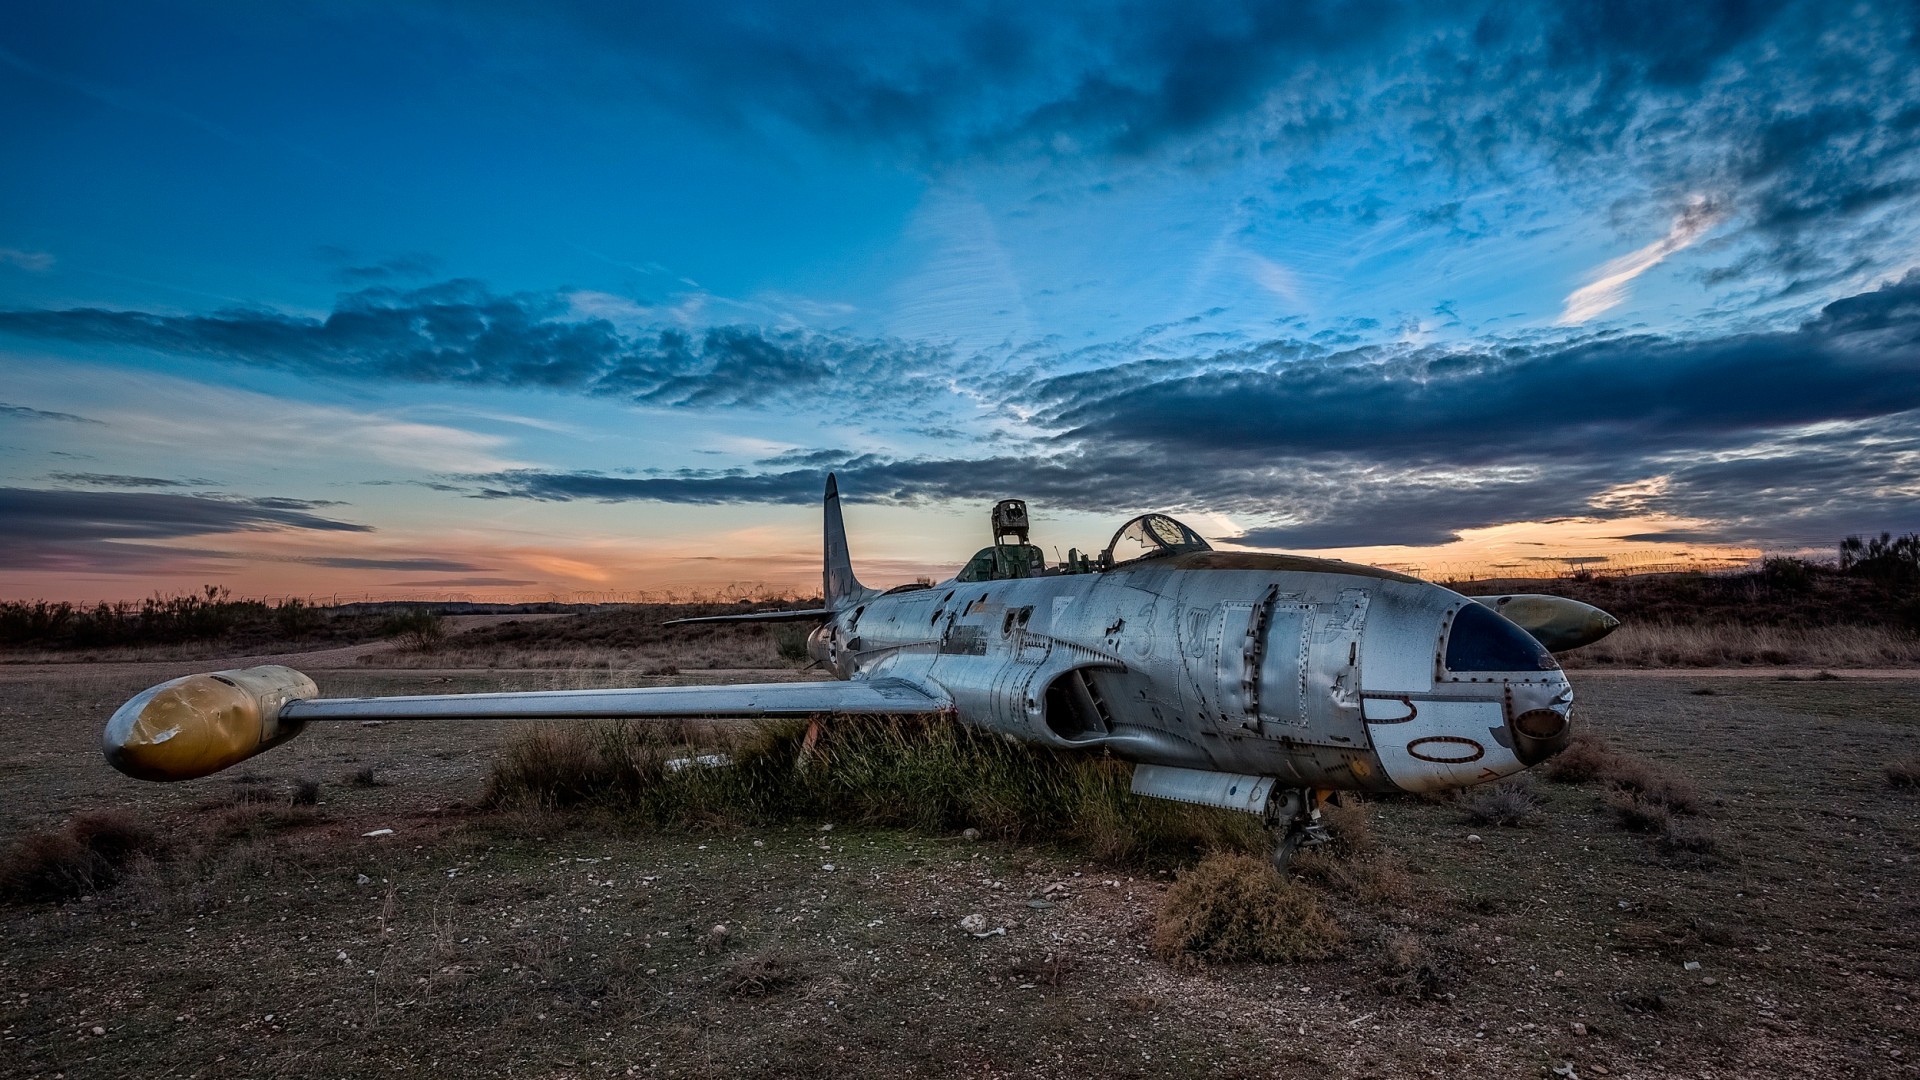 General 1920x1080 landscape wreck military aircraft jet fighter dusk military vehicle clouds military vehicle